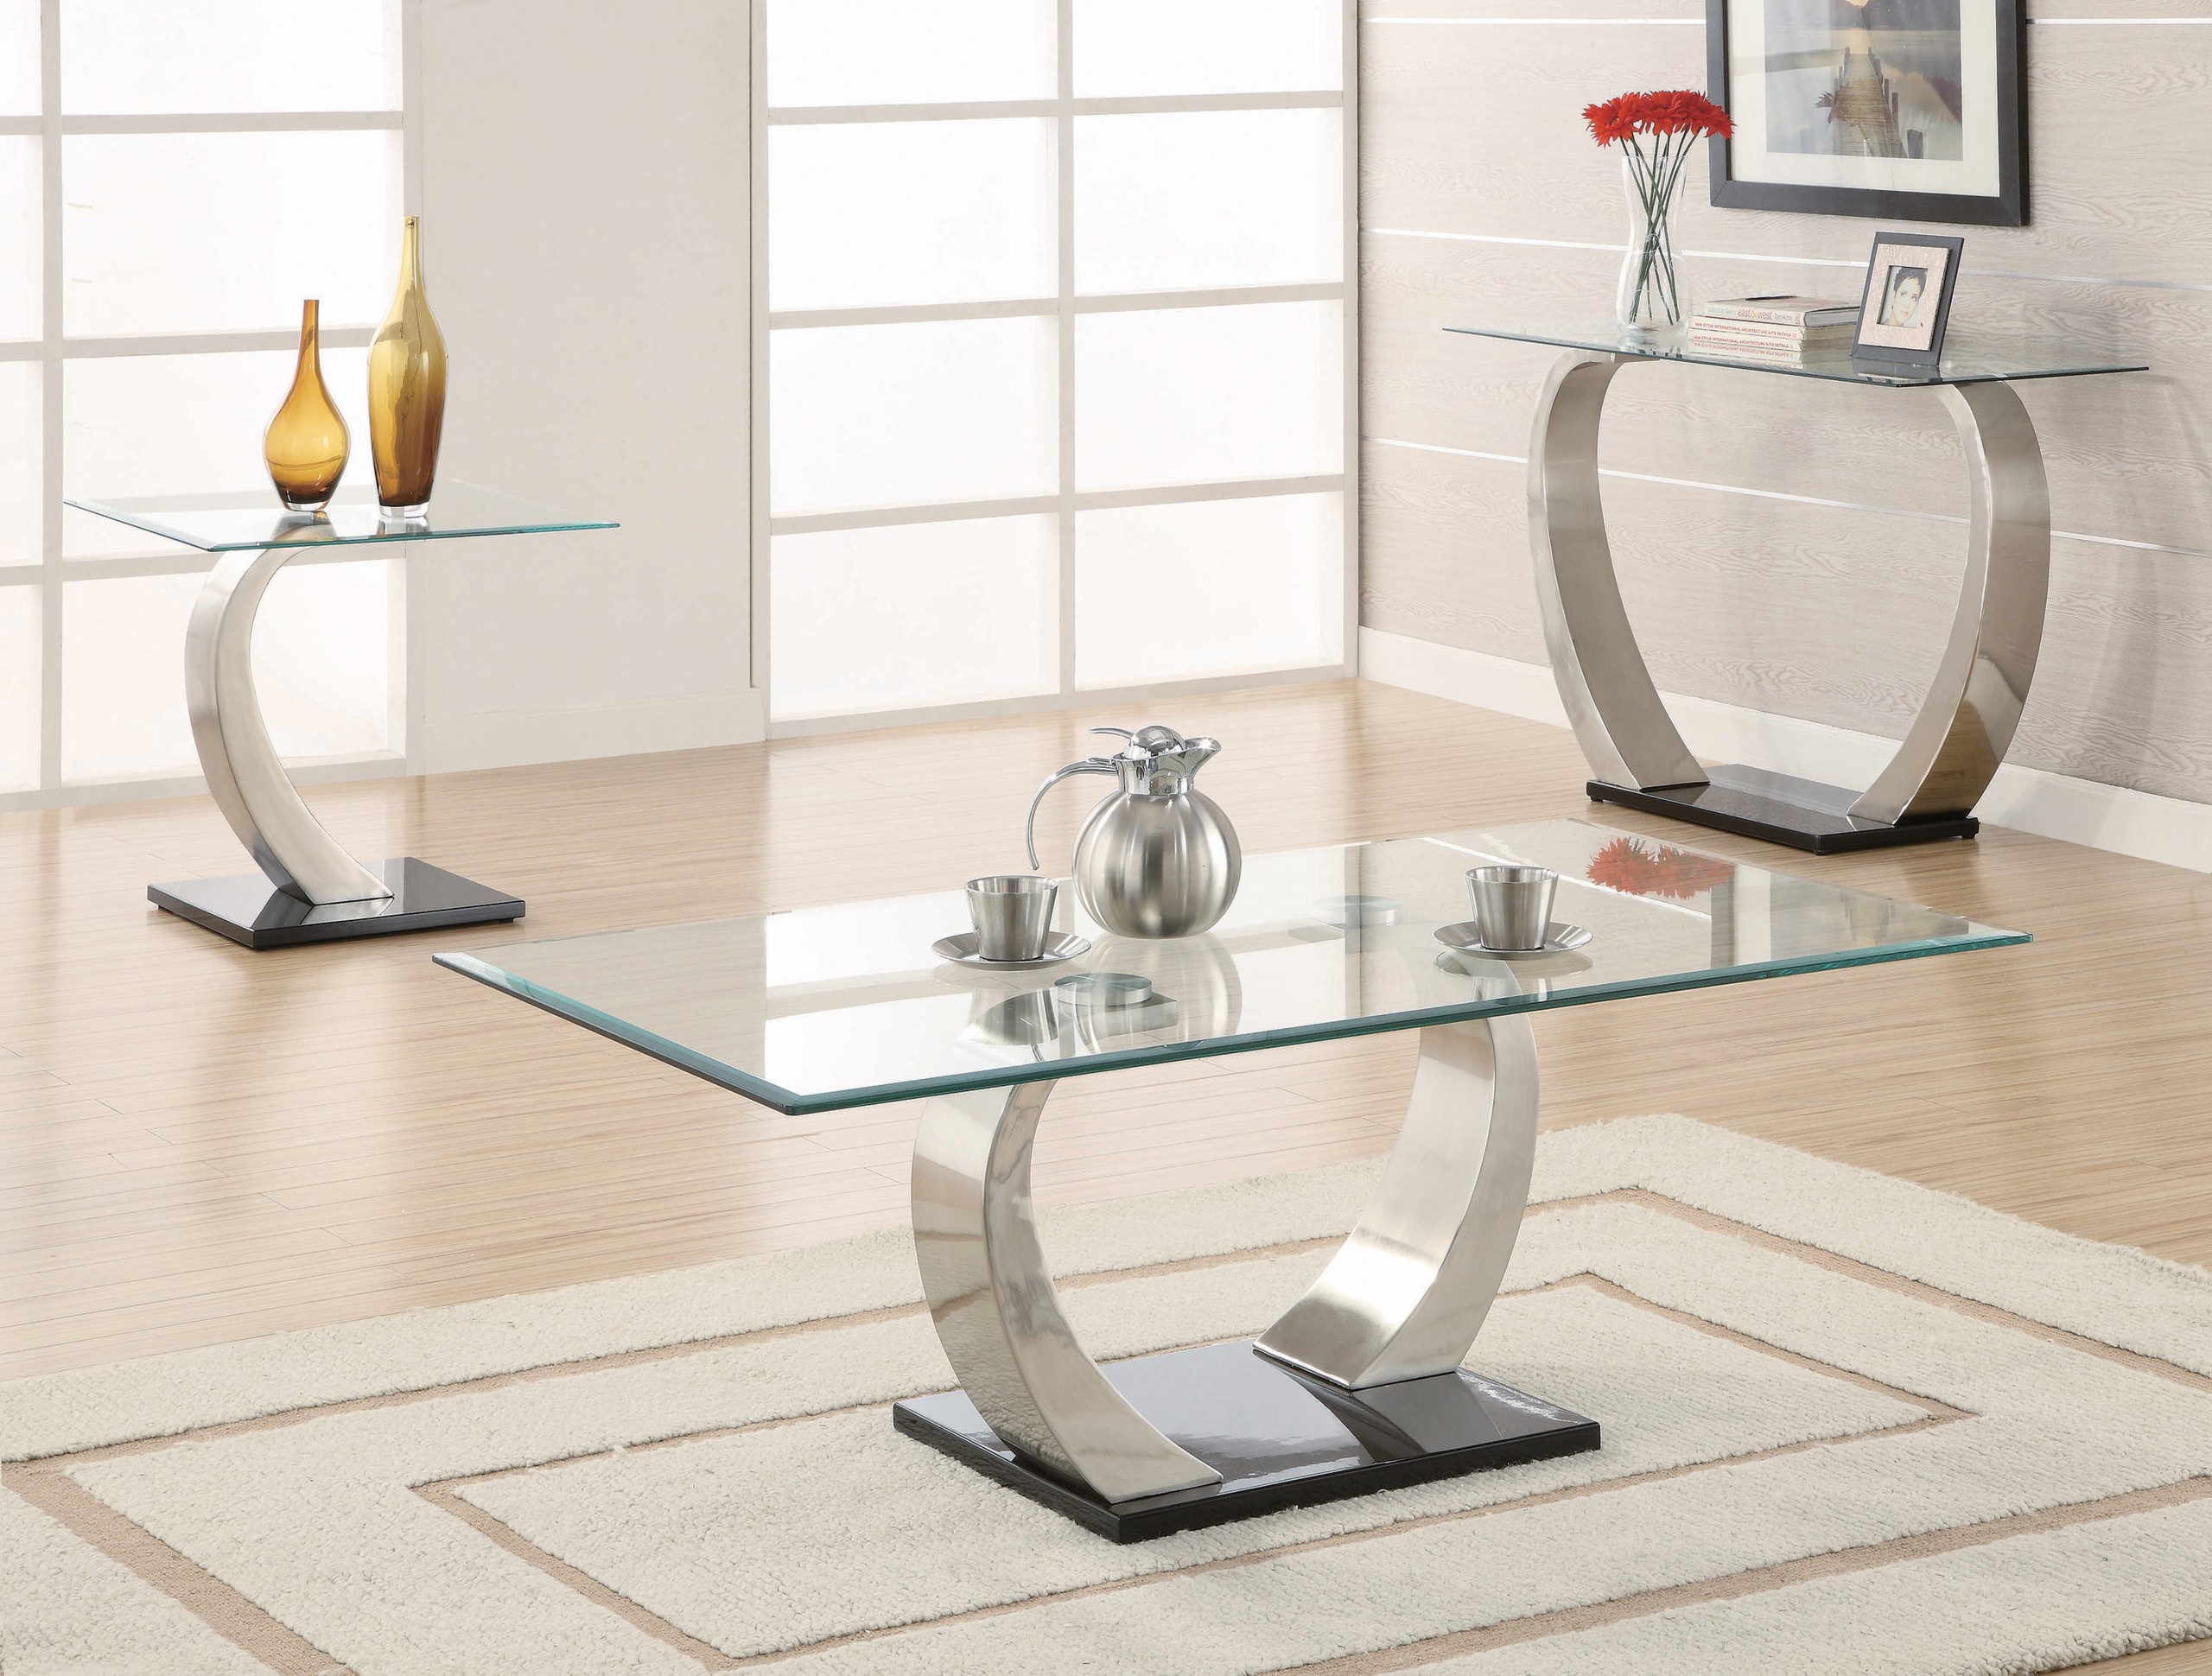 End Table with Glass Top in Silver and Black Metal Base